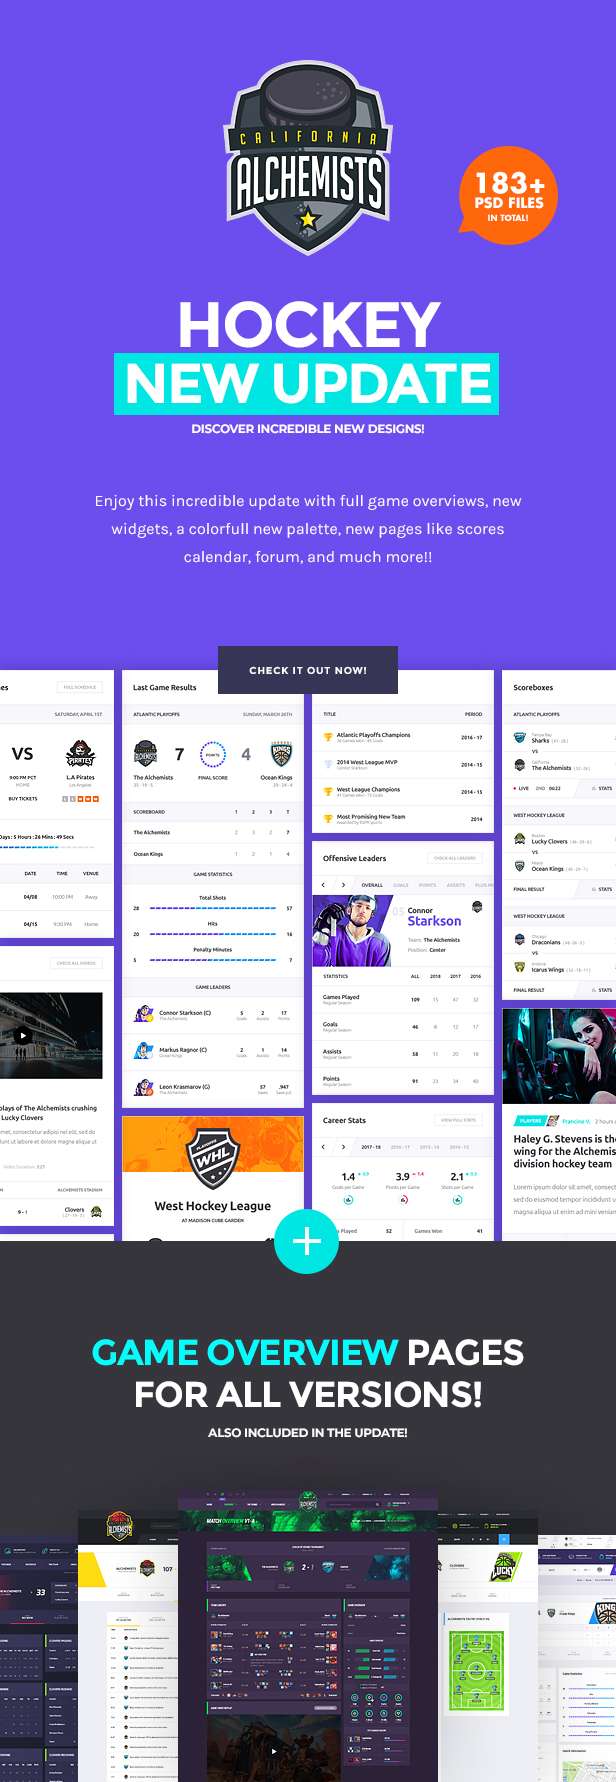 The Alchemists - Sports News PSD Template V4.0 + eSports & Gaming - 10